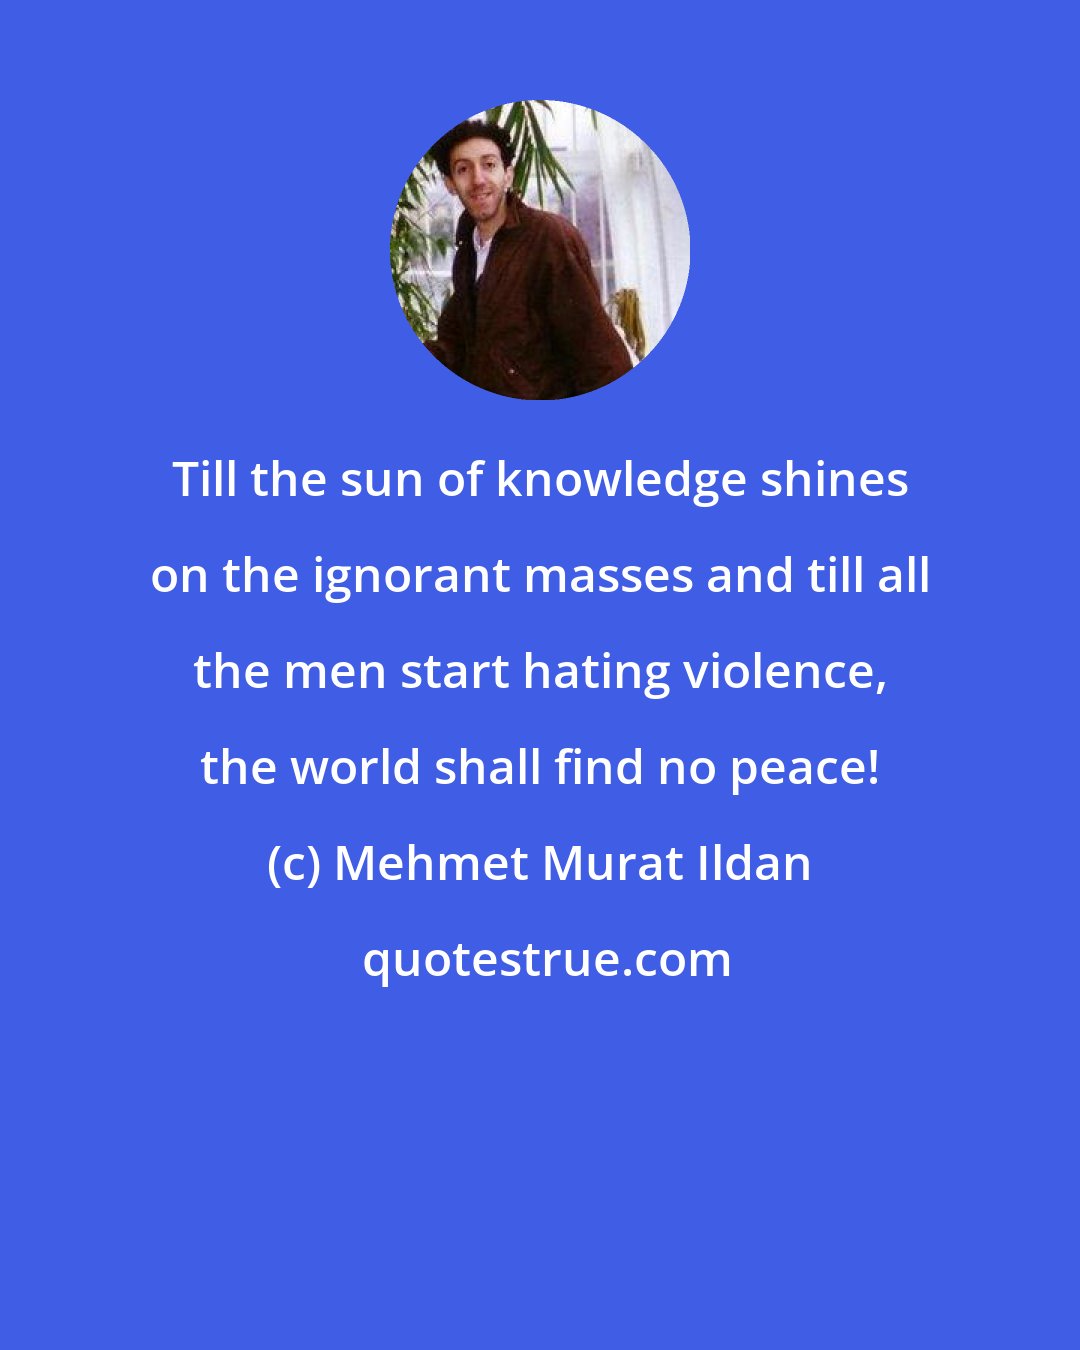 Mehmet Murat Ildan: Till the sun of knowledge shines on the ignorant masses and till all the men start hating violence, the world shall find no peace!